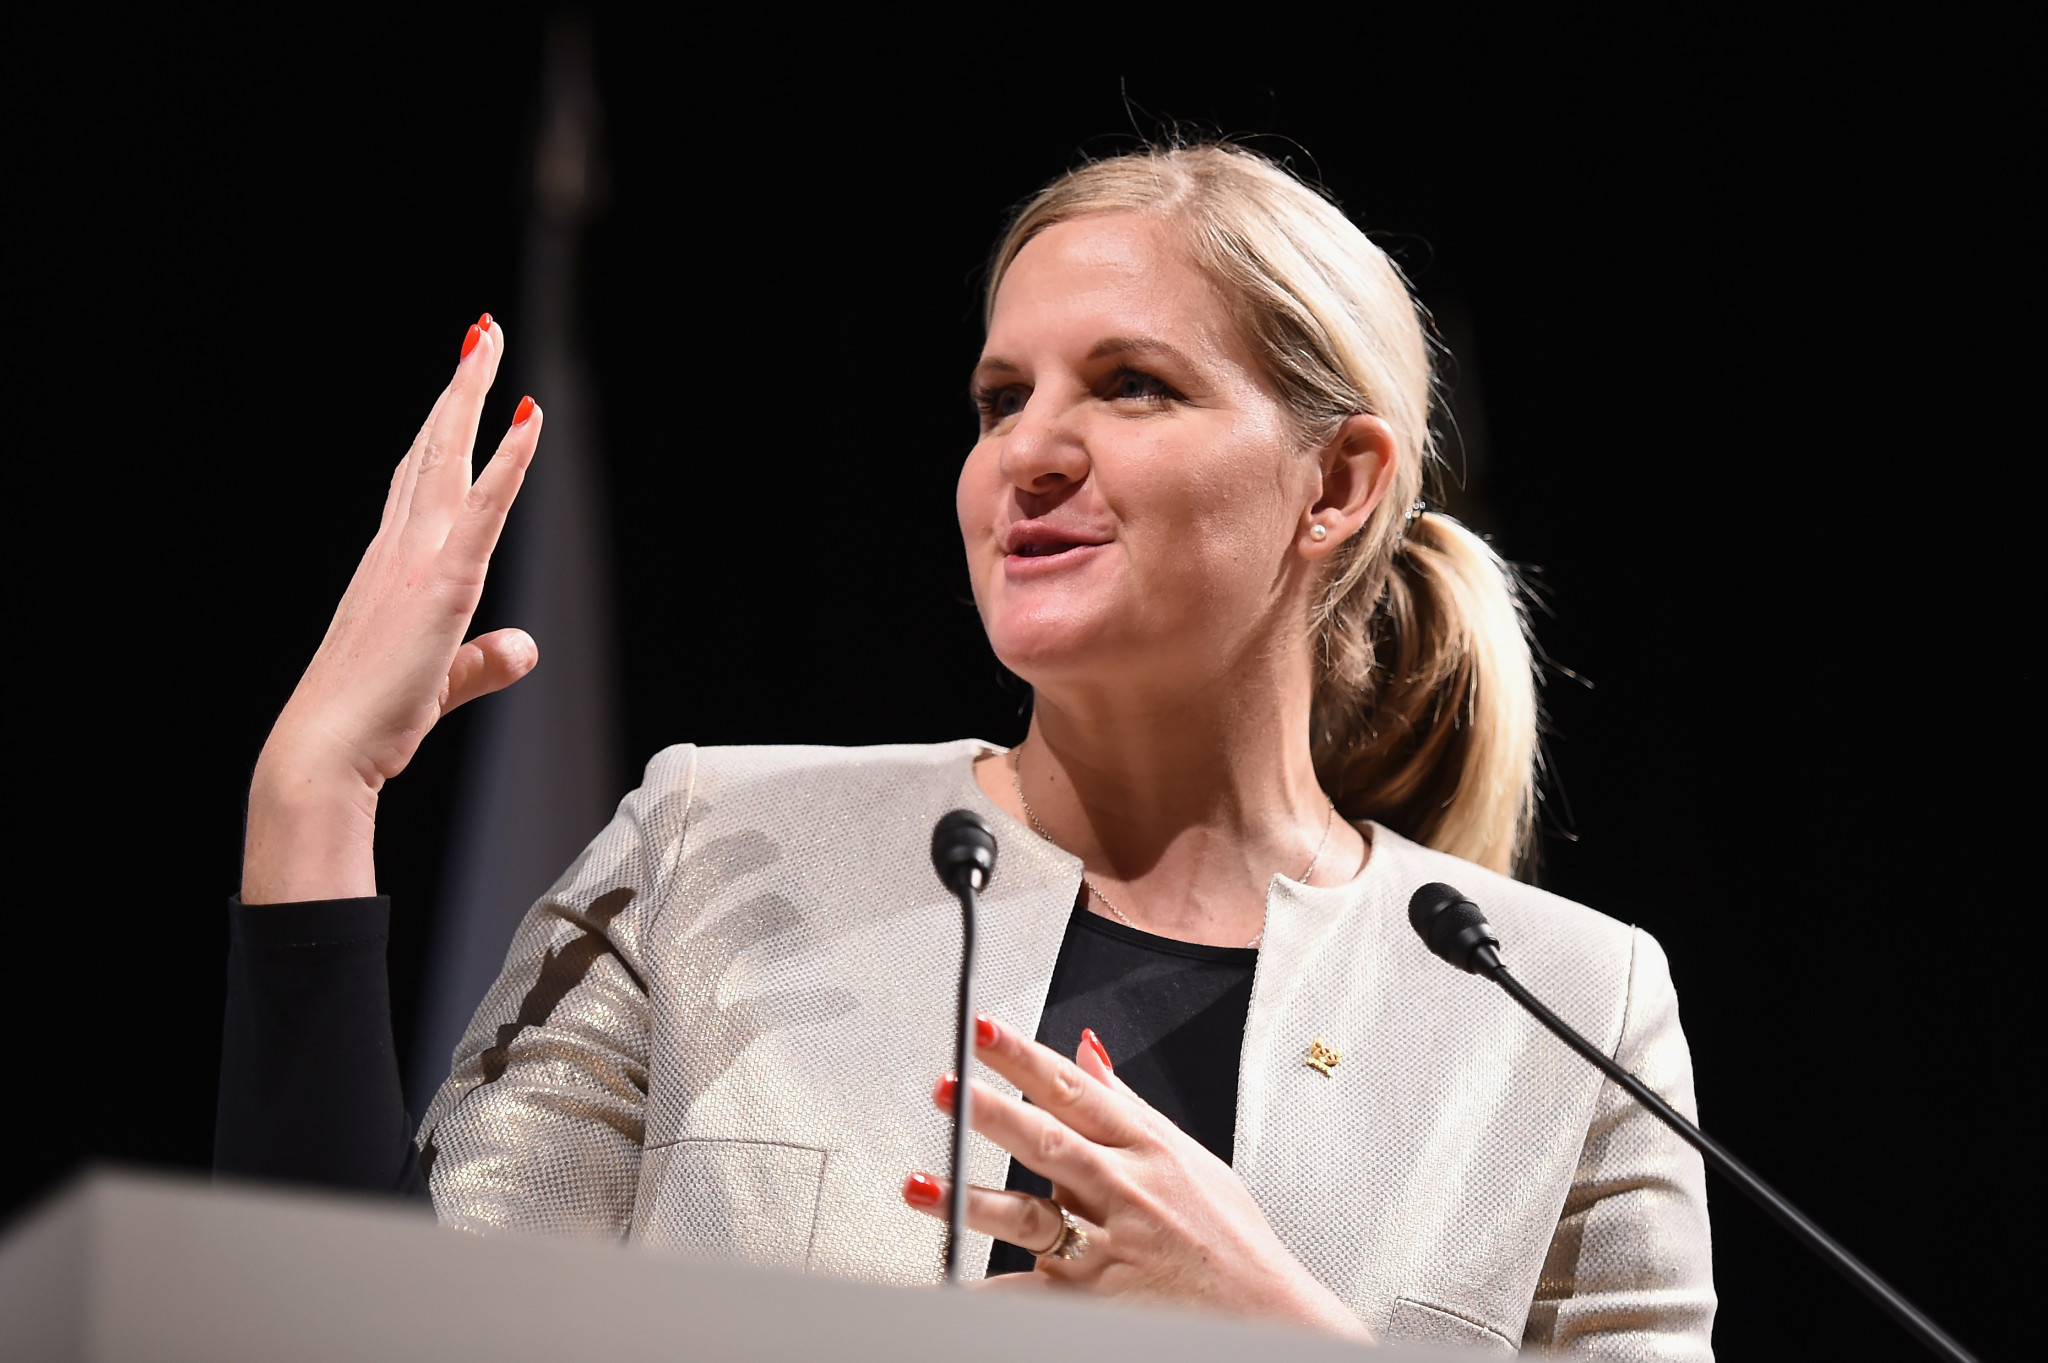 Former PE teacher Kathleen Lobb replaces International Olympic Committee member and double Olympic gold medallist Kirsty Coventry, pictured, as vice-president of the Zimbabwe Olympic Committee ©Getty Images